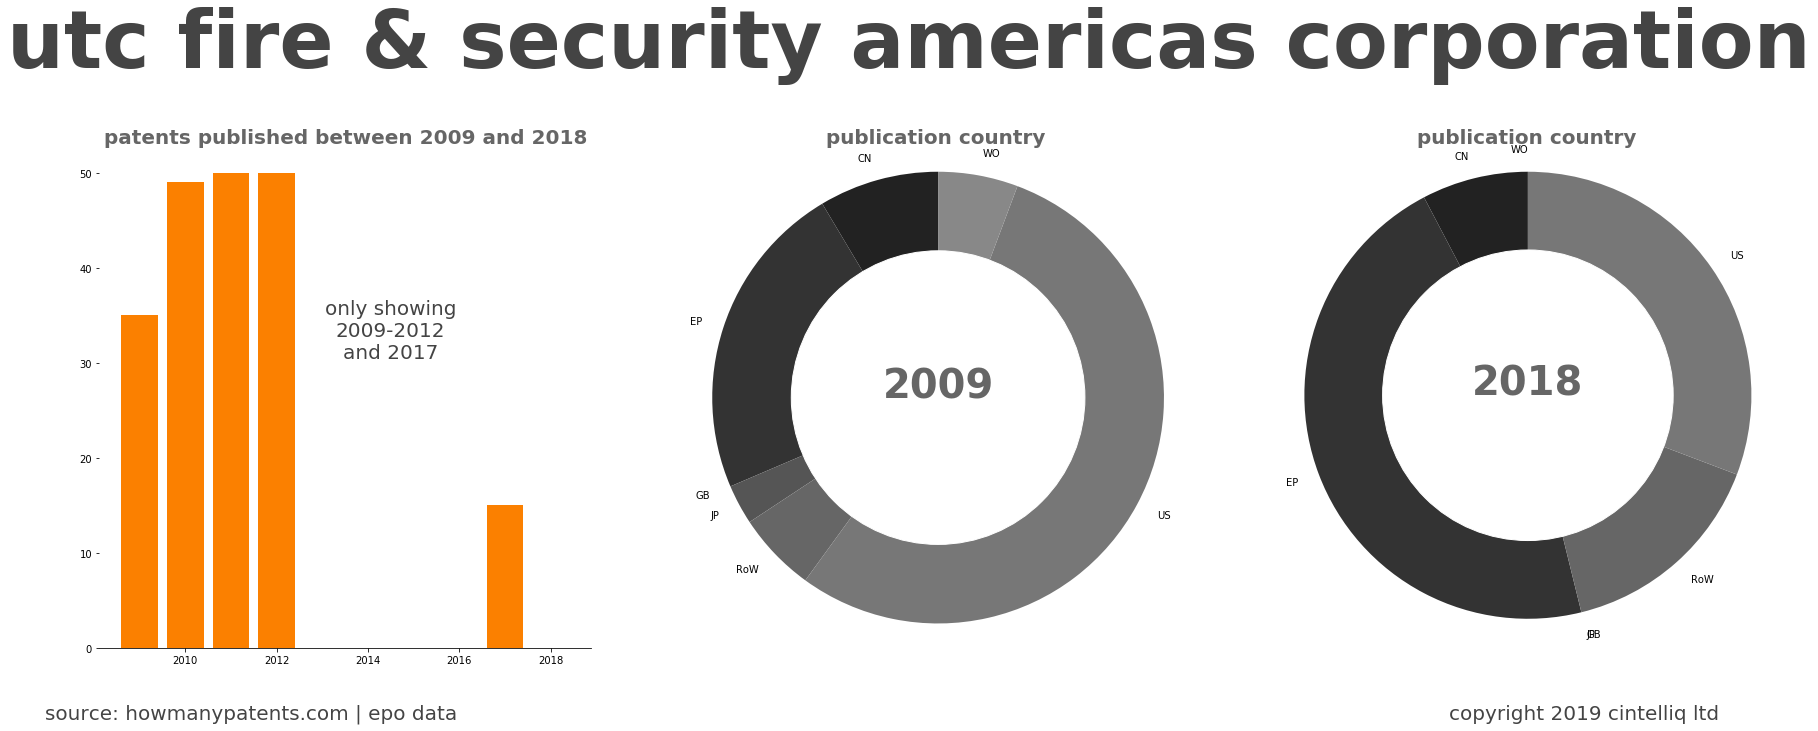 summary of patents for Utc Fire & Security Americas Corporation